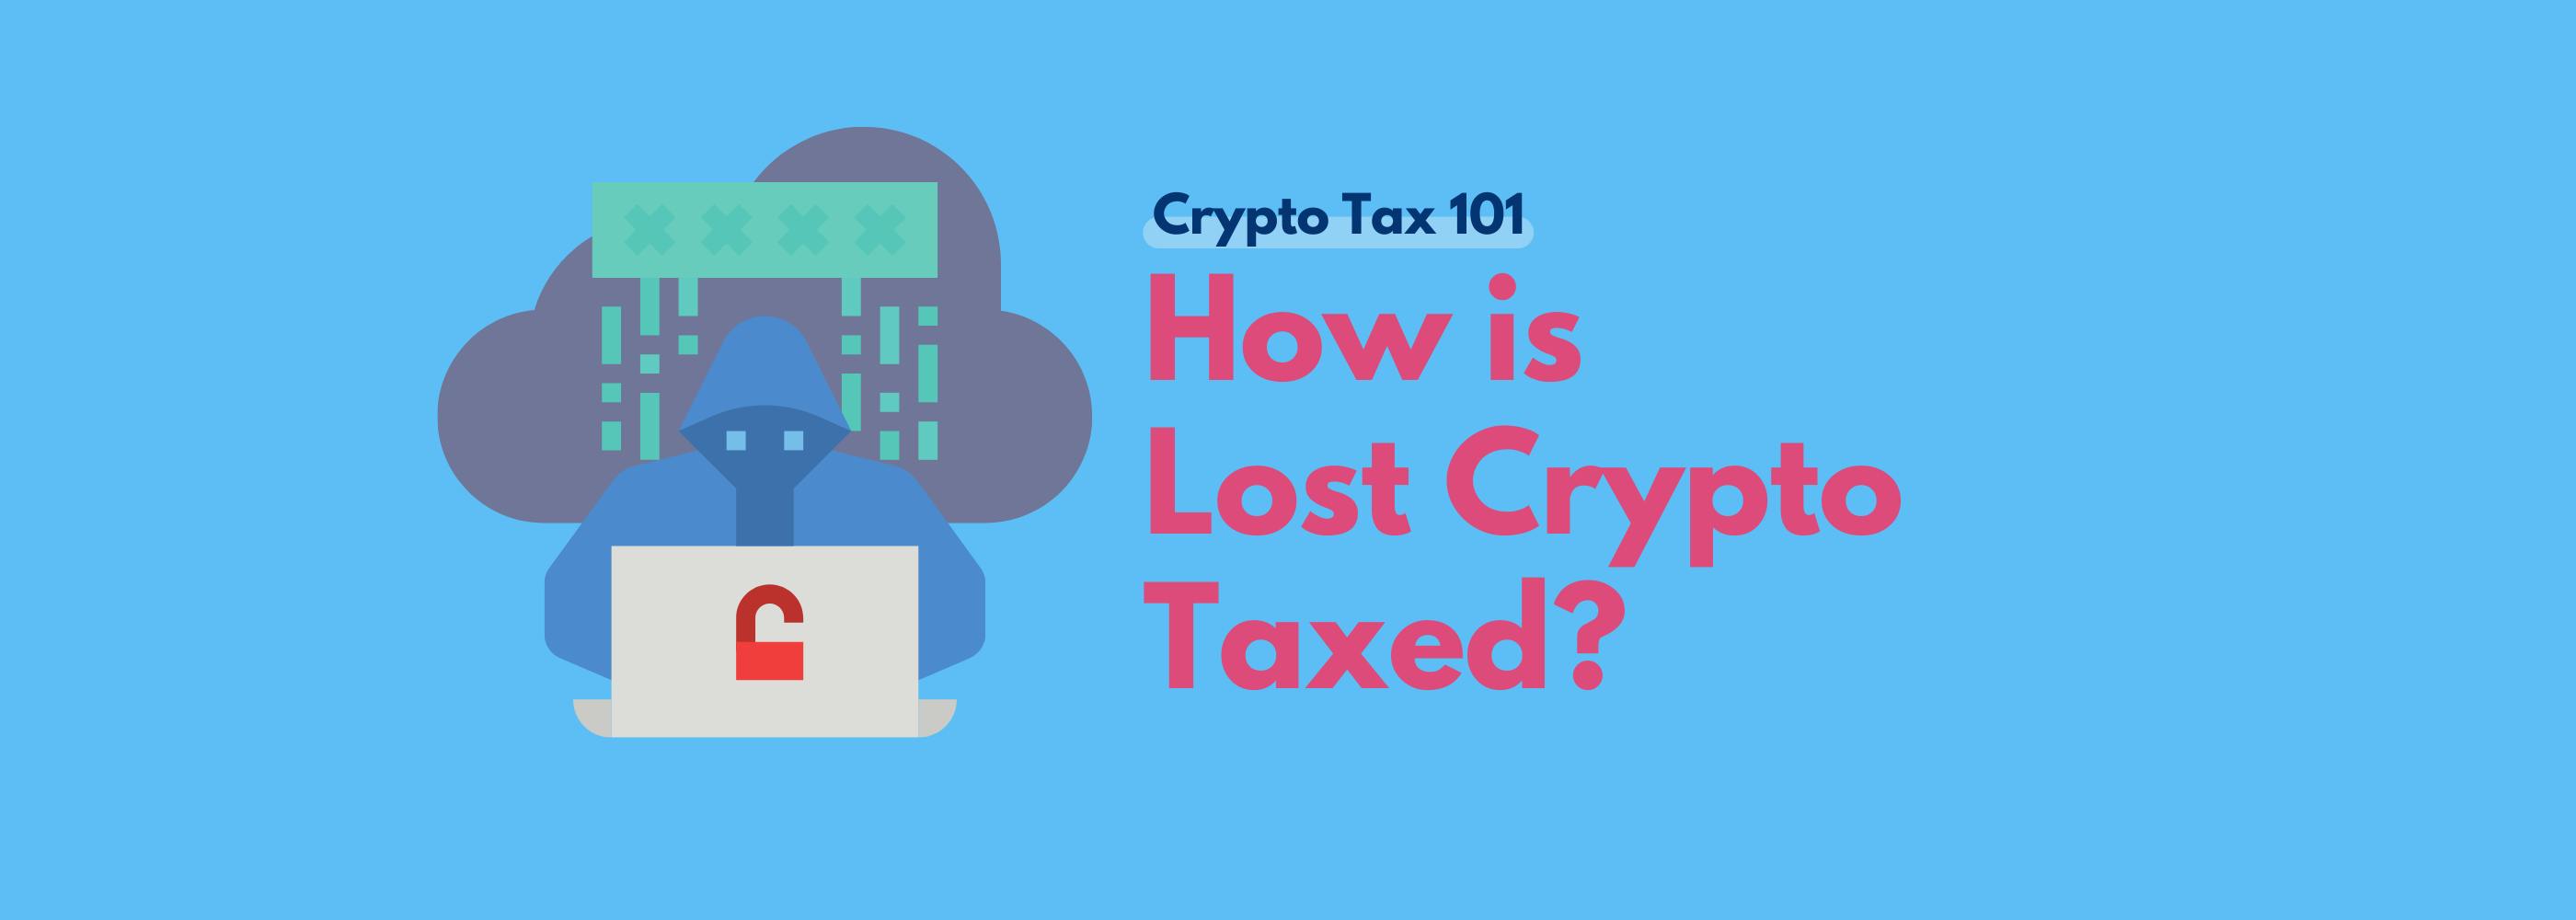 Do you get taxed in crypto if you lost how to make your own cryptocurrency like bitcoin